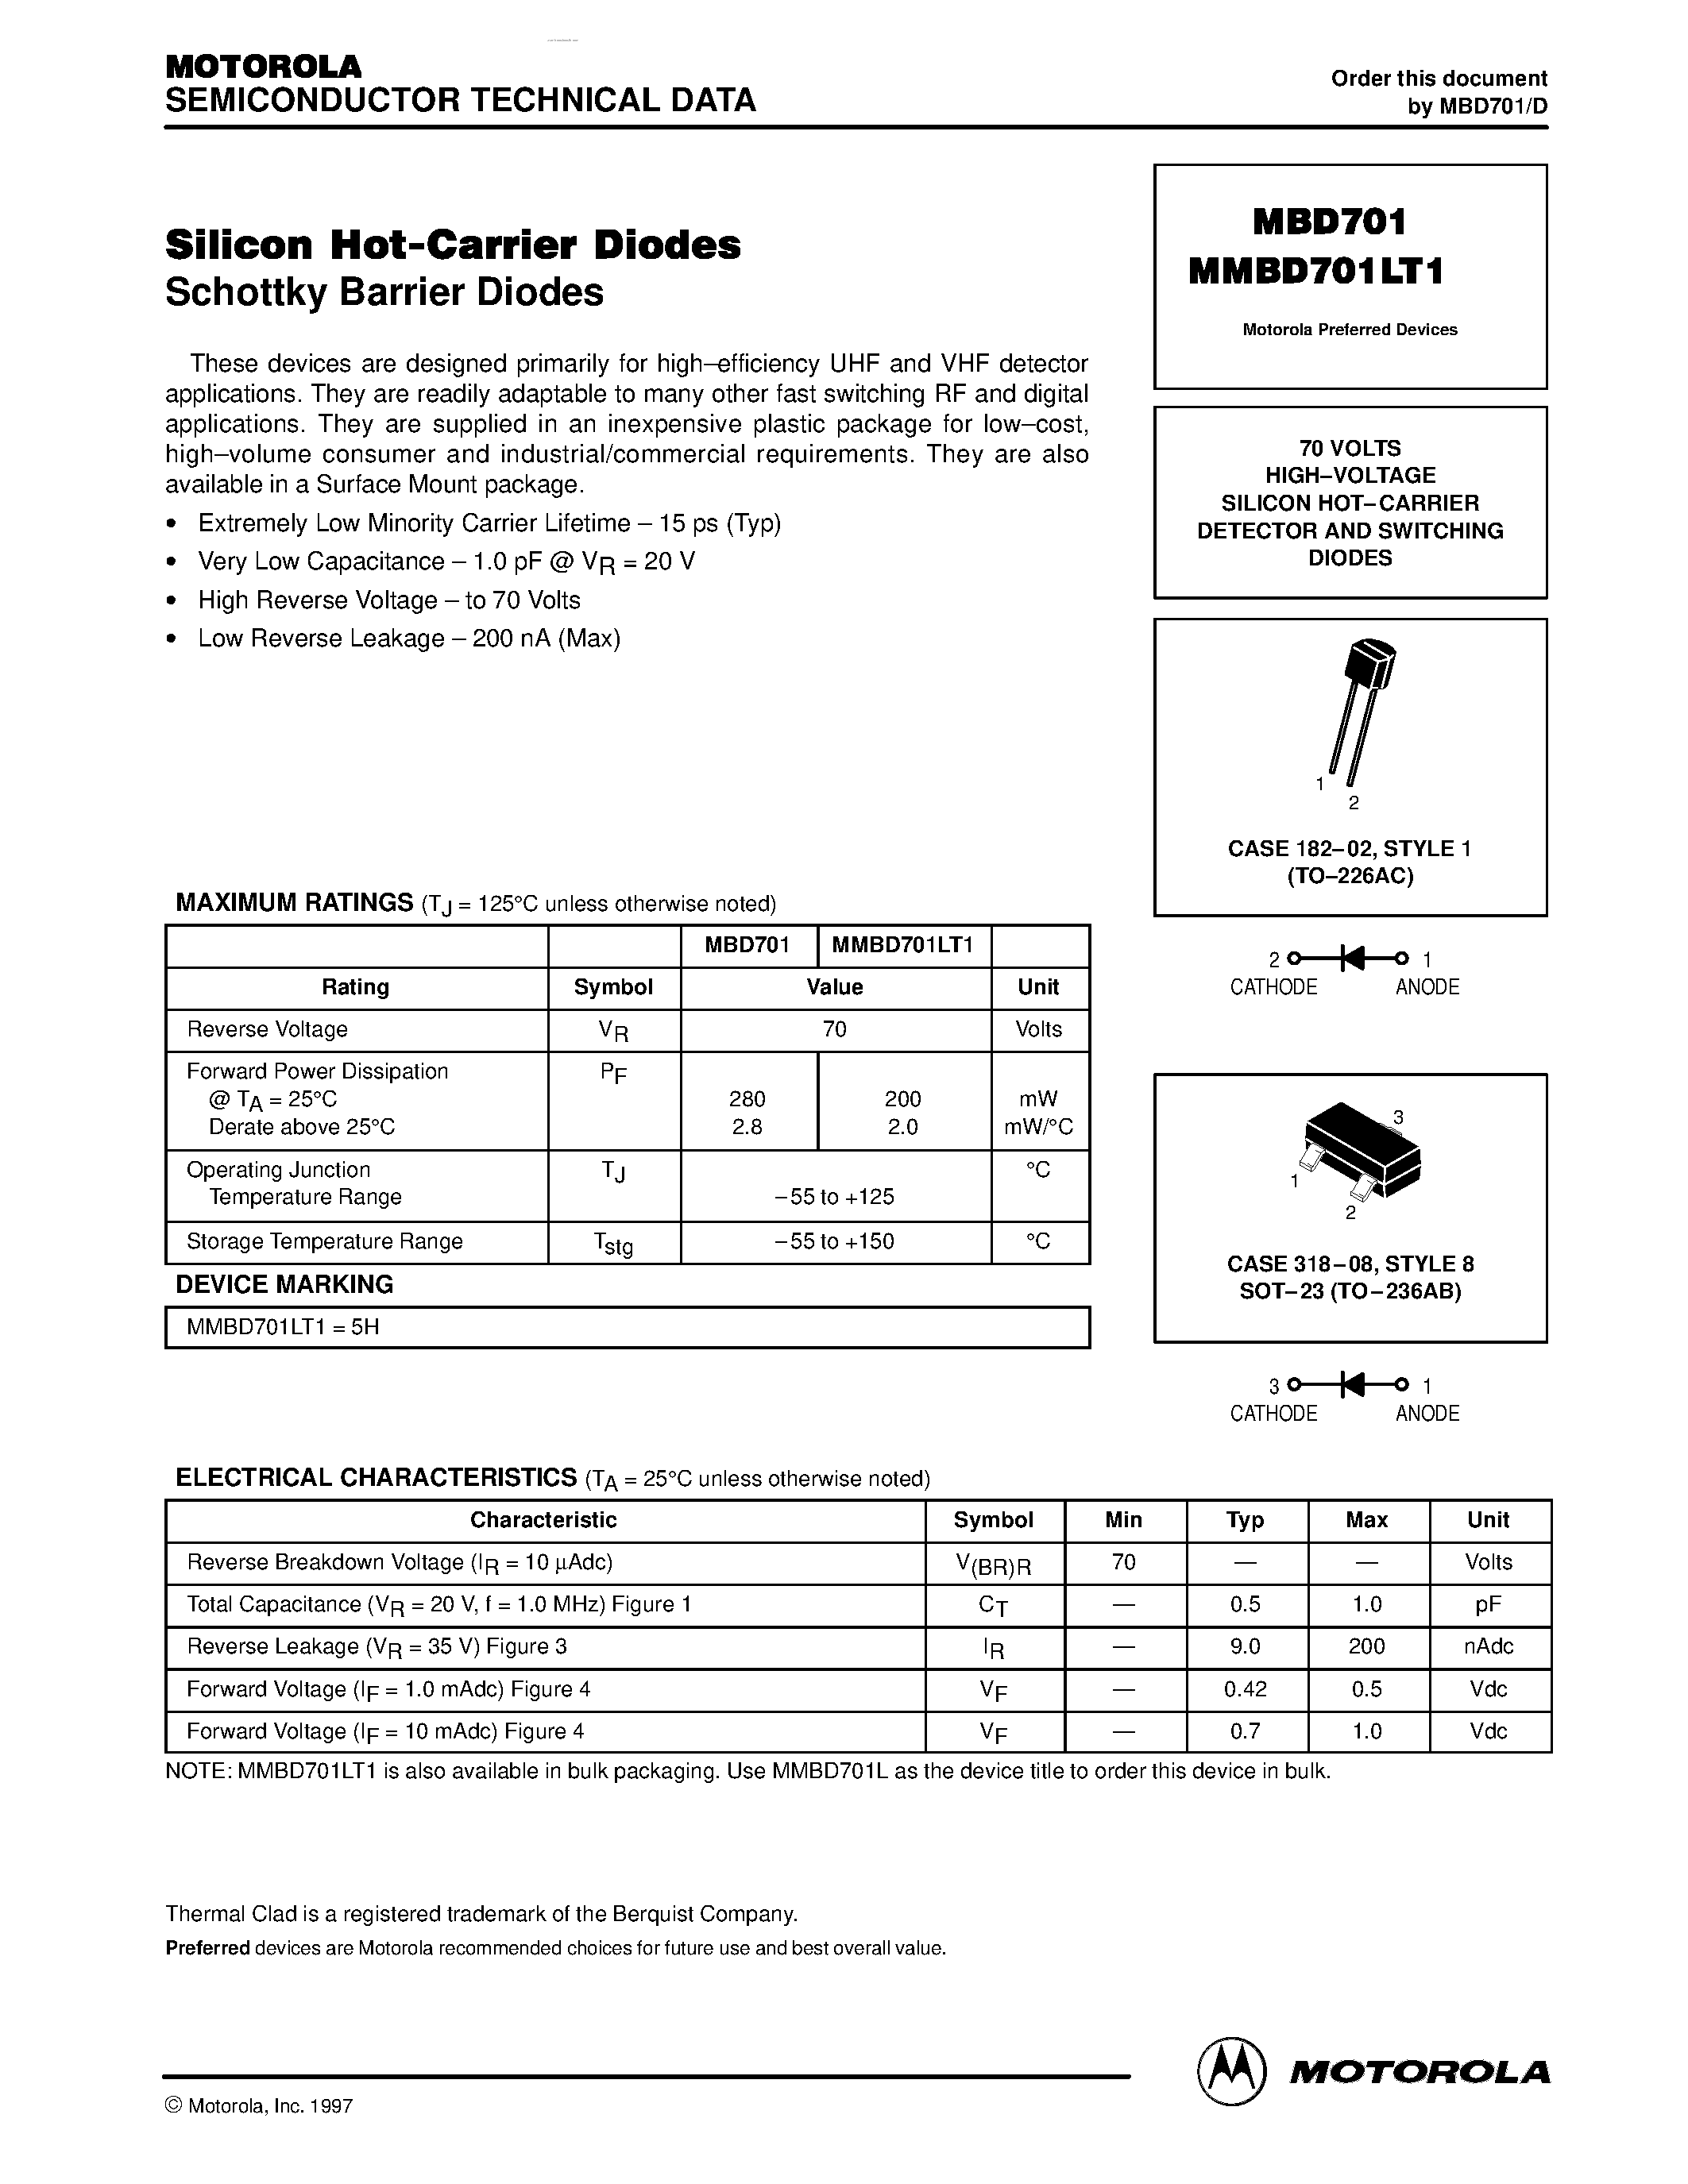 Datasheet MMBD701LT1 - CARRIER DETECTOR AND SWITCHING DIODES page 1